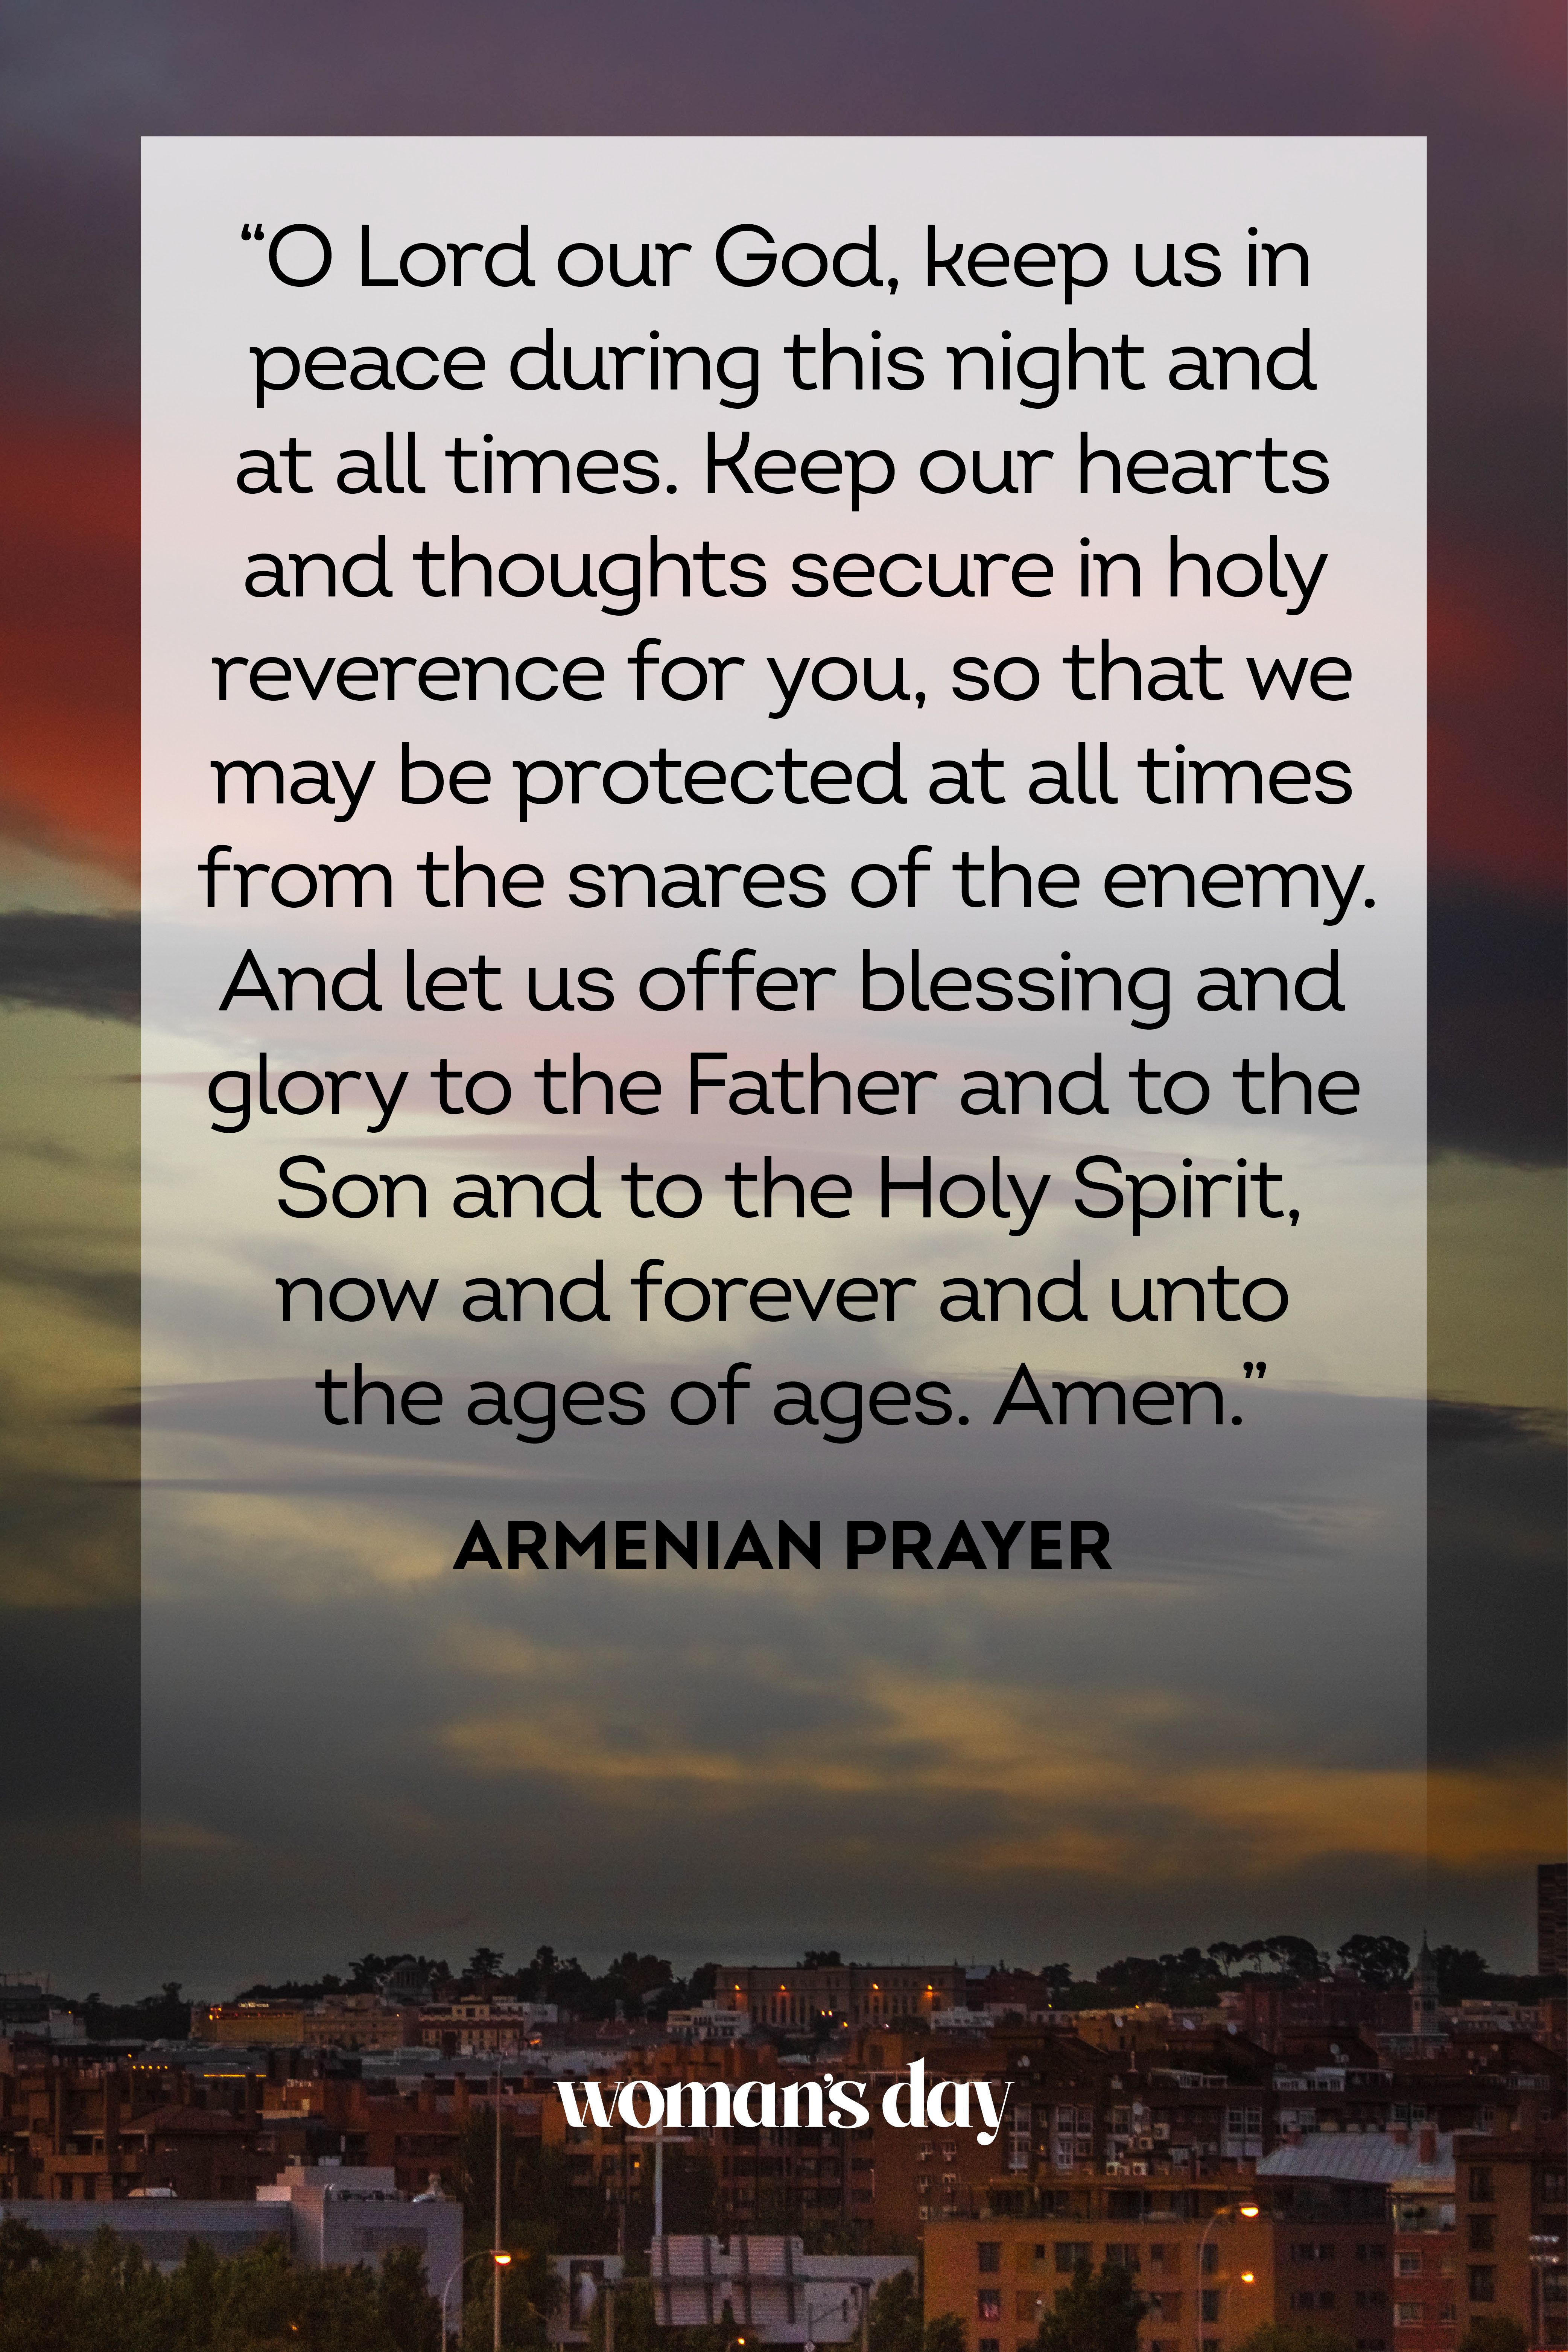 bedtime prayer for adults